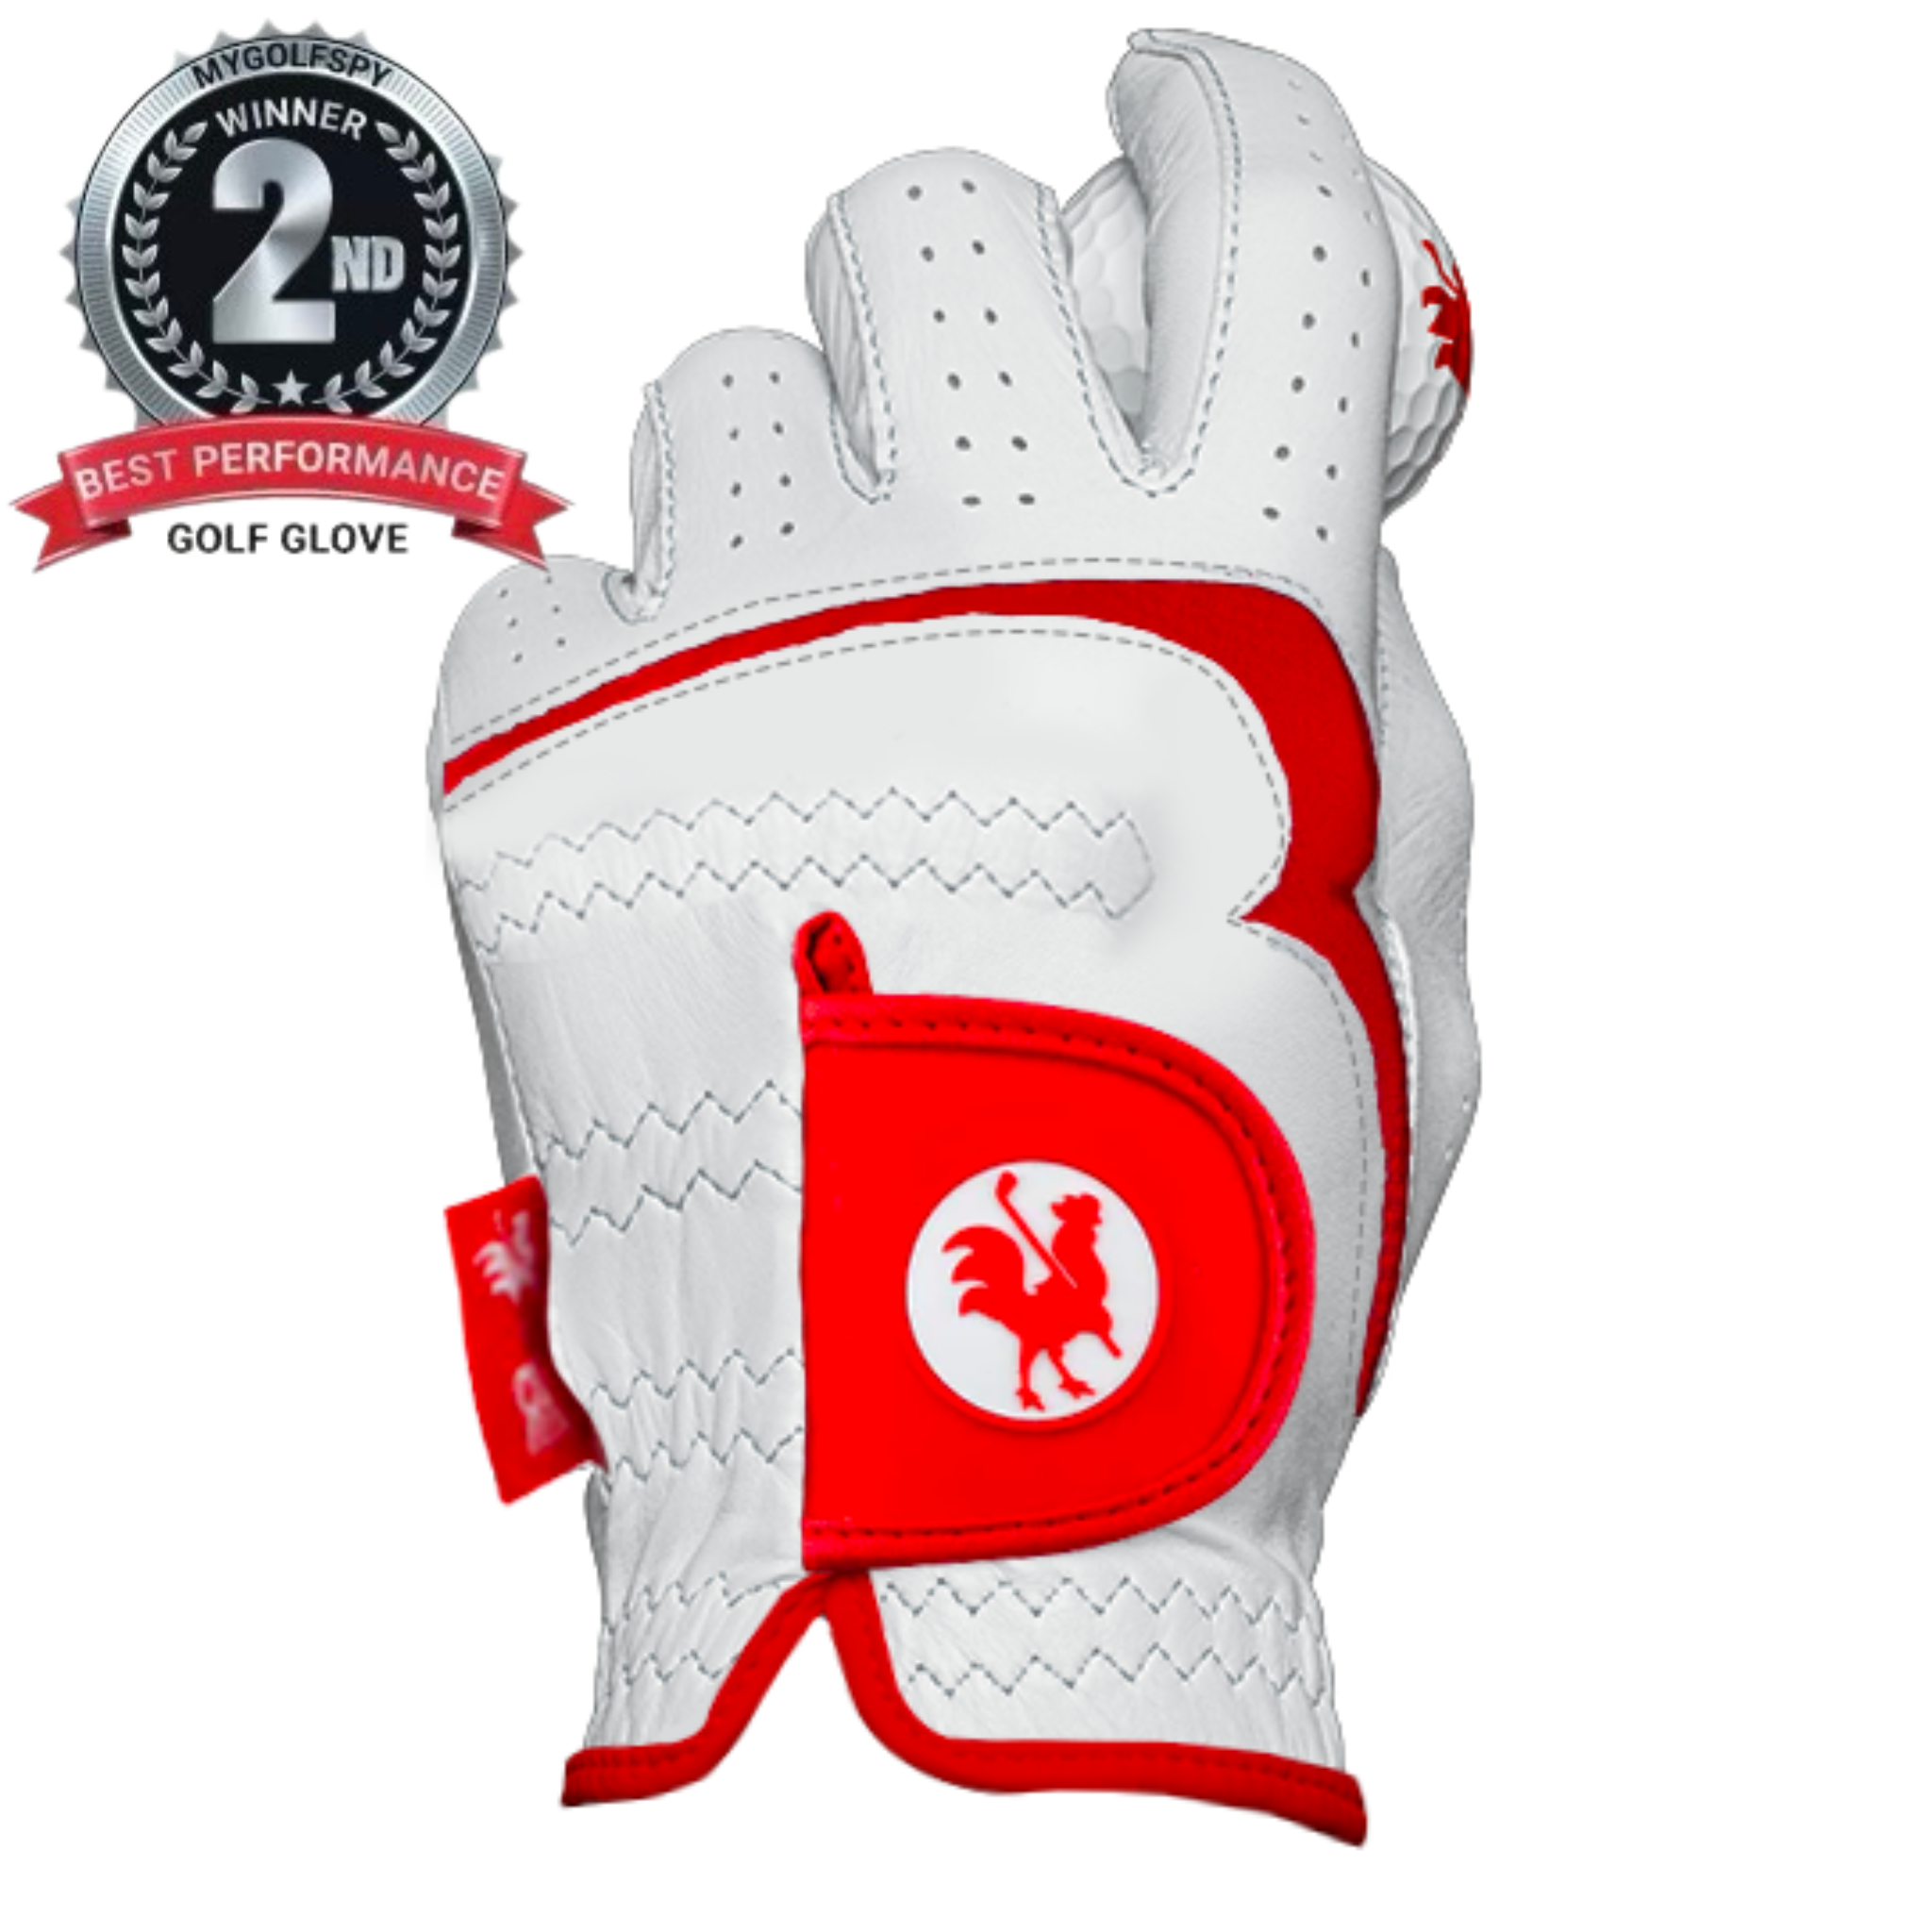 The Range Rooster golf glove